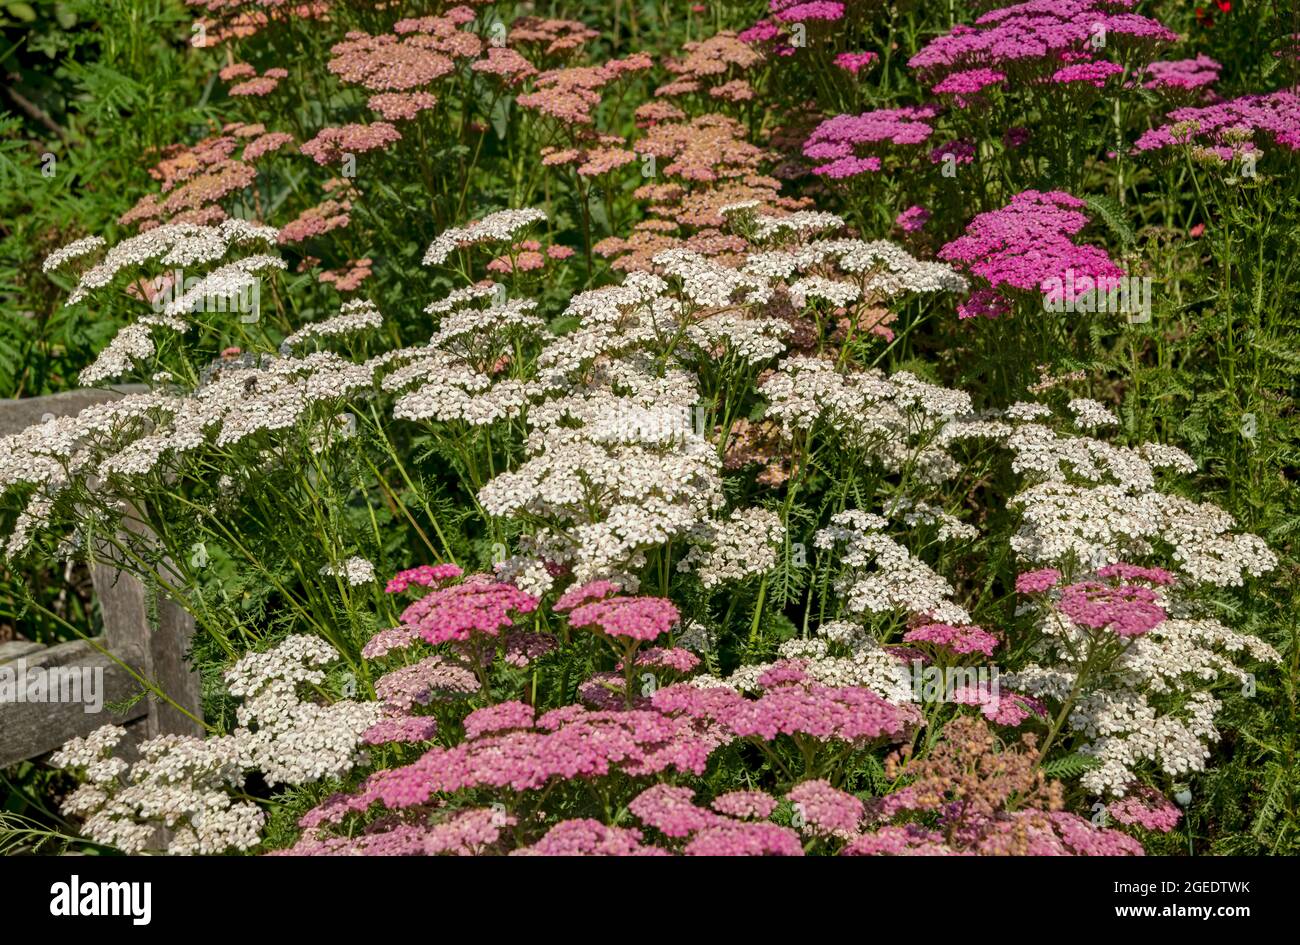 Pink and white achillea yarrow plants growing asteraceae flowers flowering in a garden border in summer England UK United Kingdom GB Great Britain Stock Photo